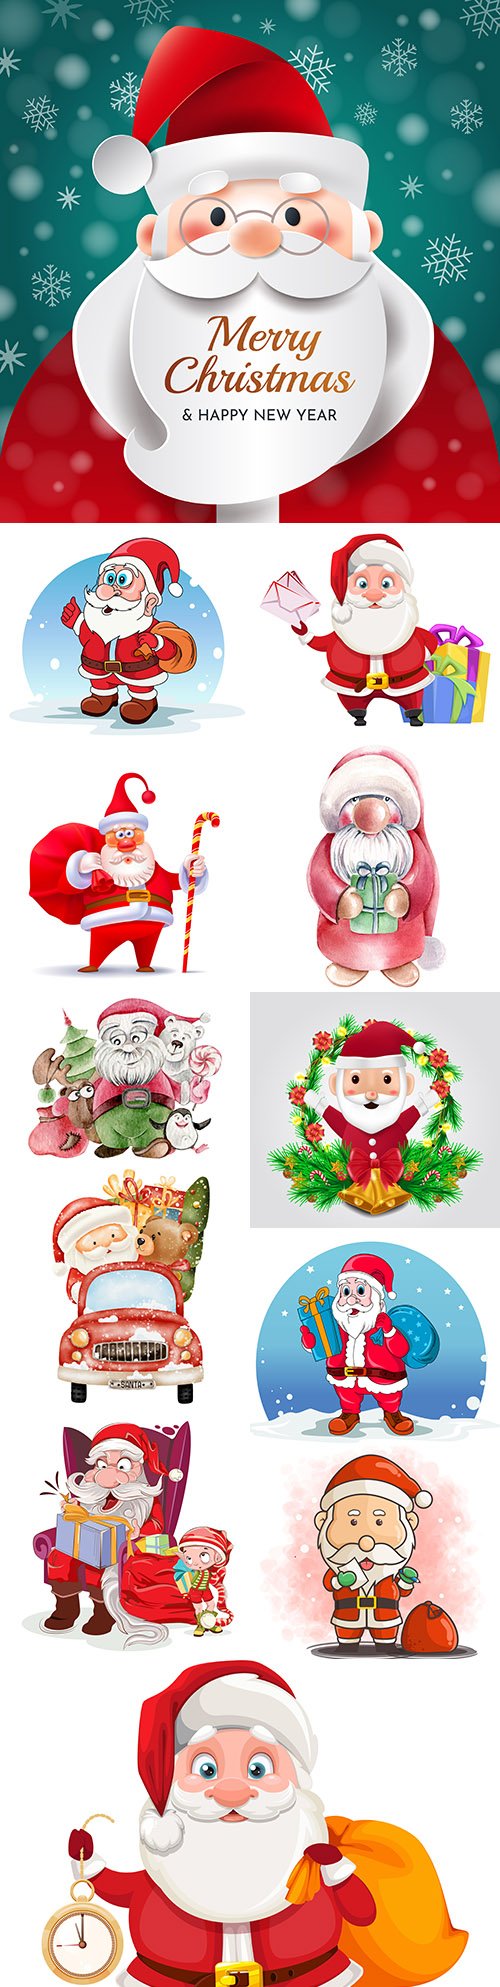 Santa Claus funny character with Christmas gift illustrations